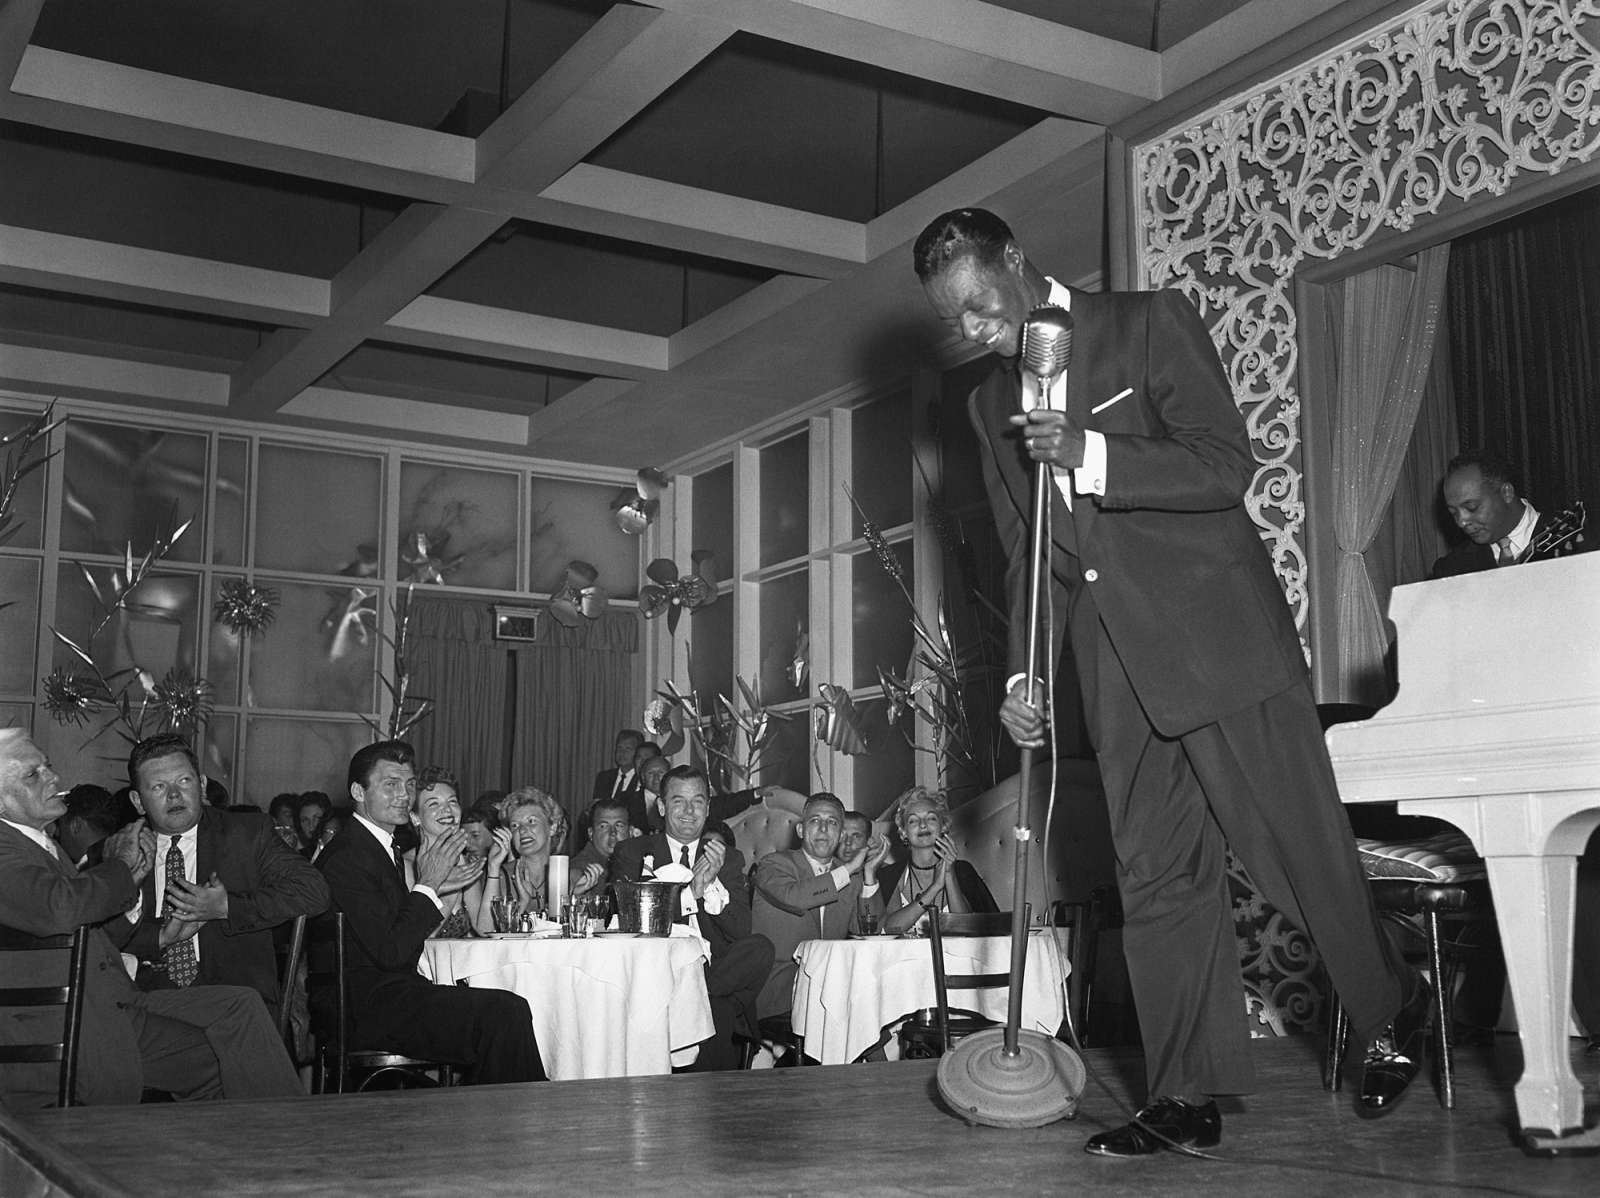 Motion Picture Television Archive, Sid Avery: Nat King Cole: Performing at Ciro, 1954